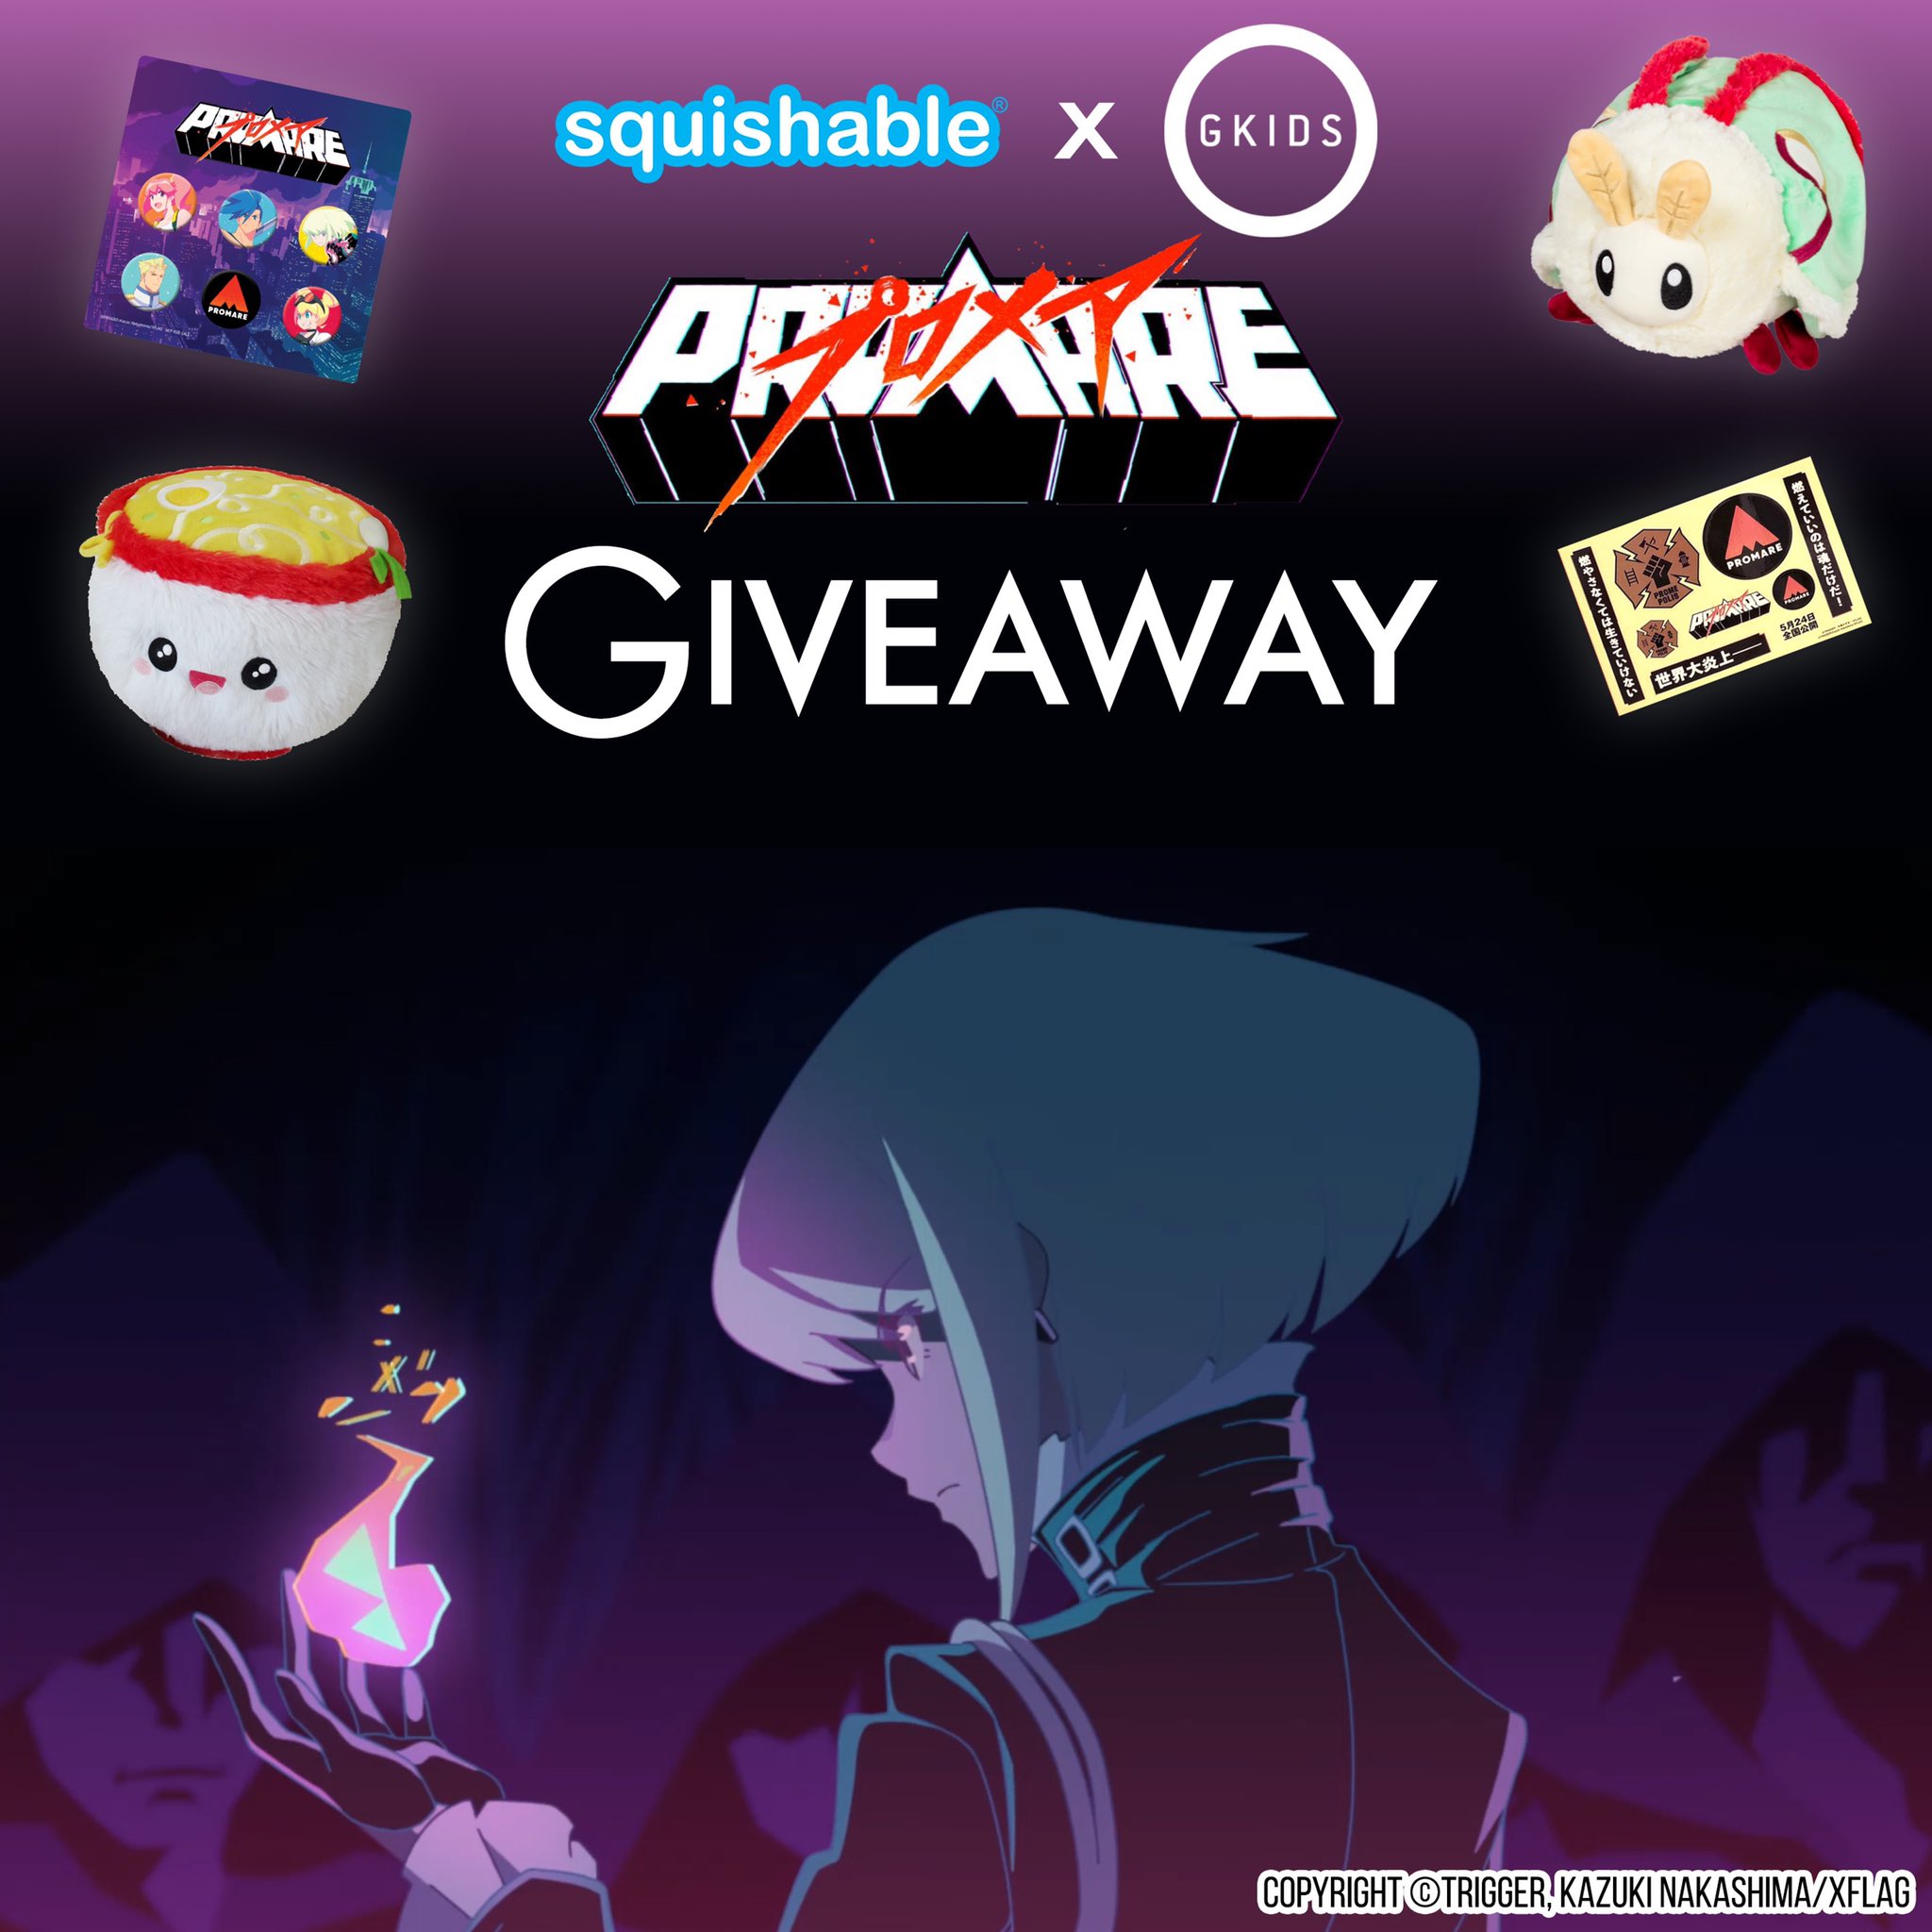 Gkids Films Gkidsgiveaway We Re Giving Away 2 Promare Tickets Exclusive Merch 1 Squishable From Squishable Enter T Co Fn0tl7afys Promare From The Creators Of Gurrenlagann Killlakill Hits Theaters Sept